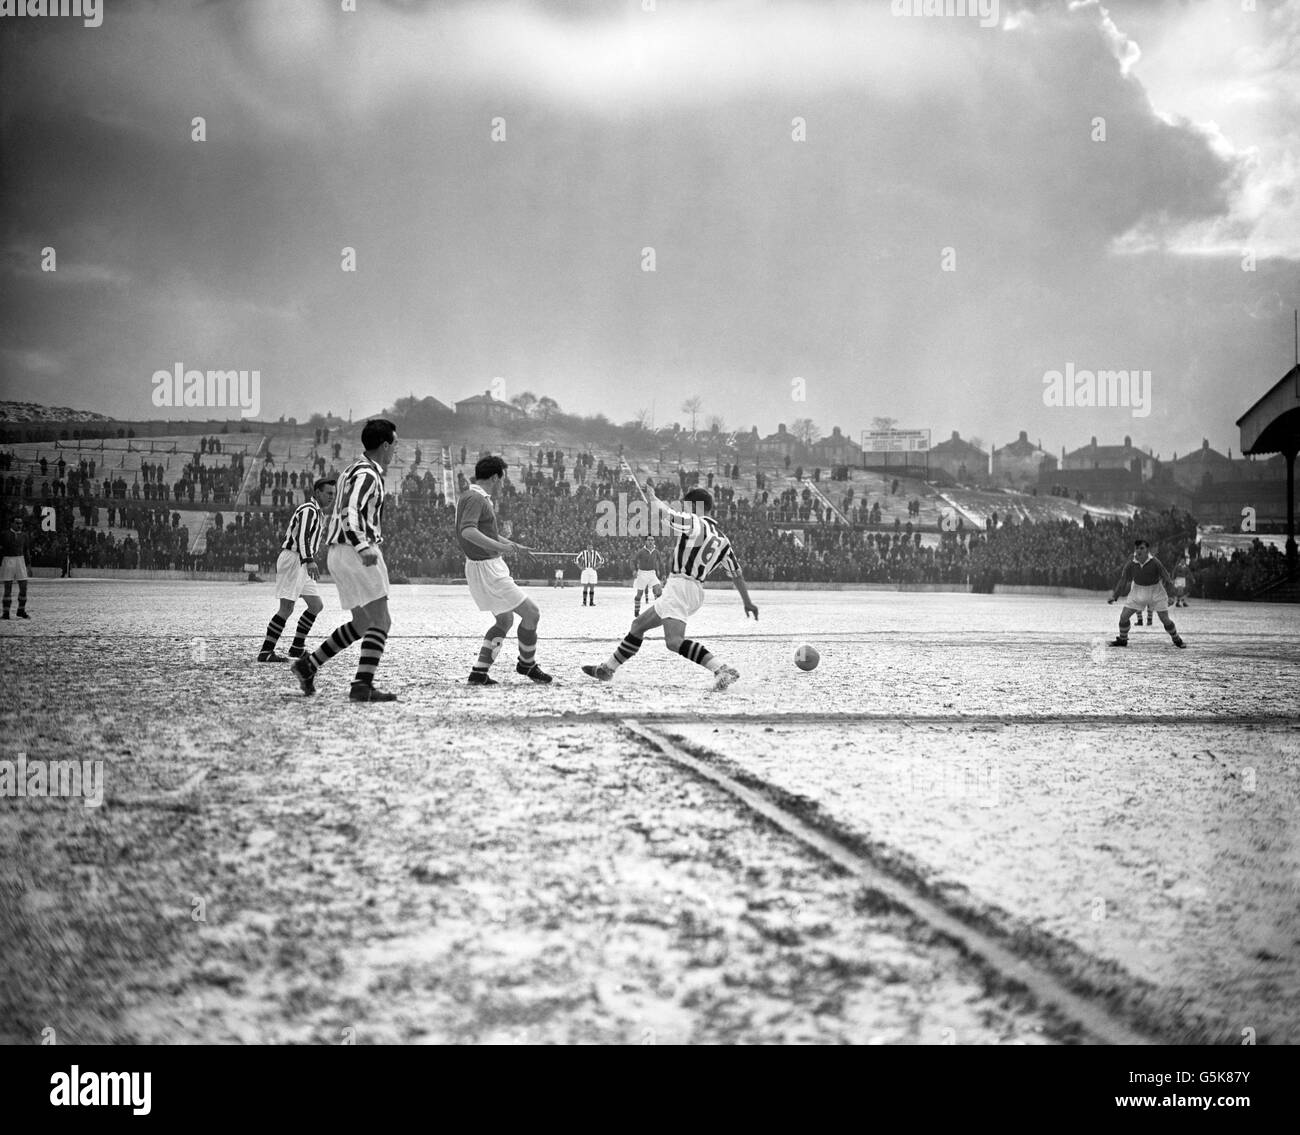 Gerry Summers (no.6) runs across the snow-covered pitch during West Bromwich Albion's First Division match against Charlton Athletic at The Valley, London. On the left is Ronnie Allen (no.10). Stock Photo